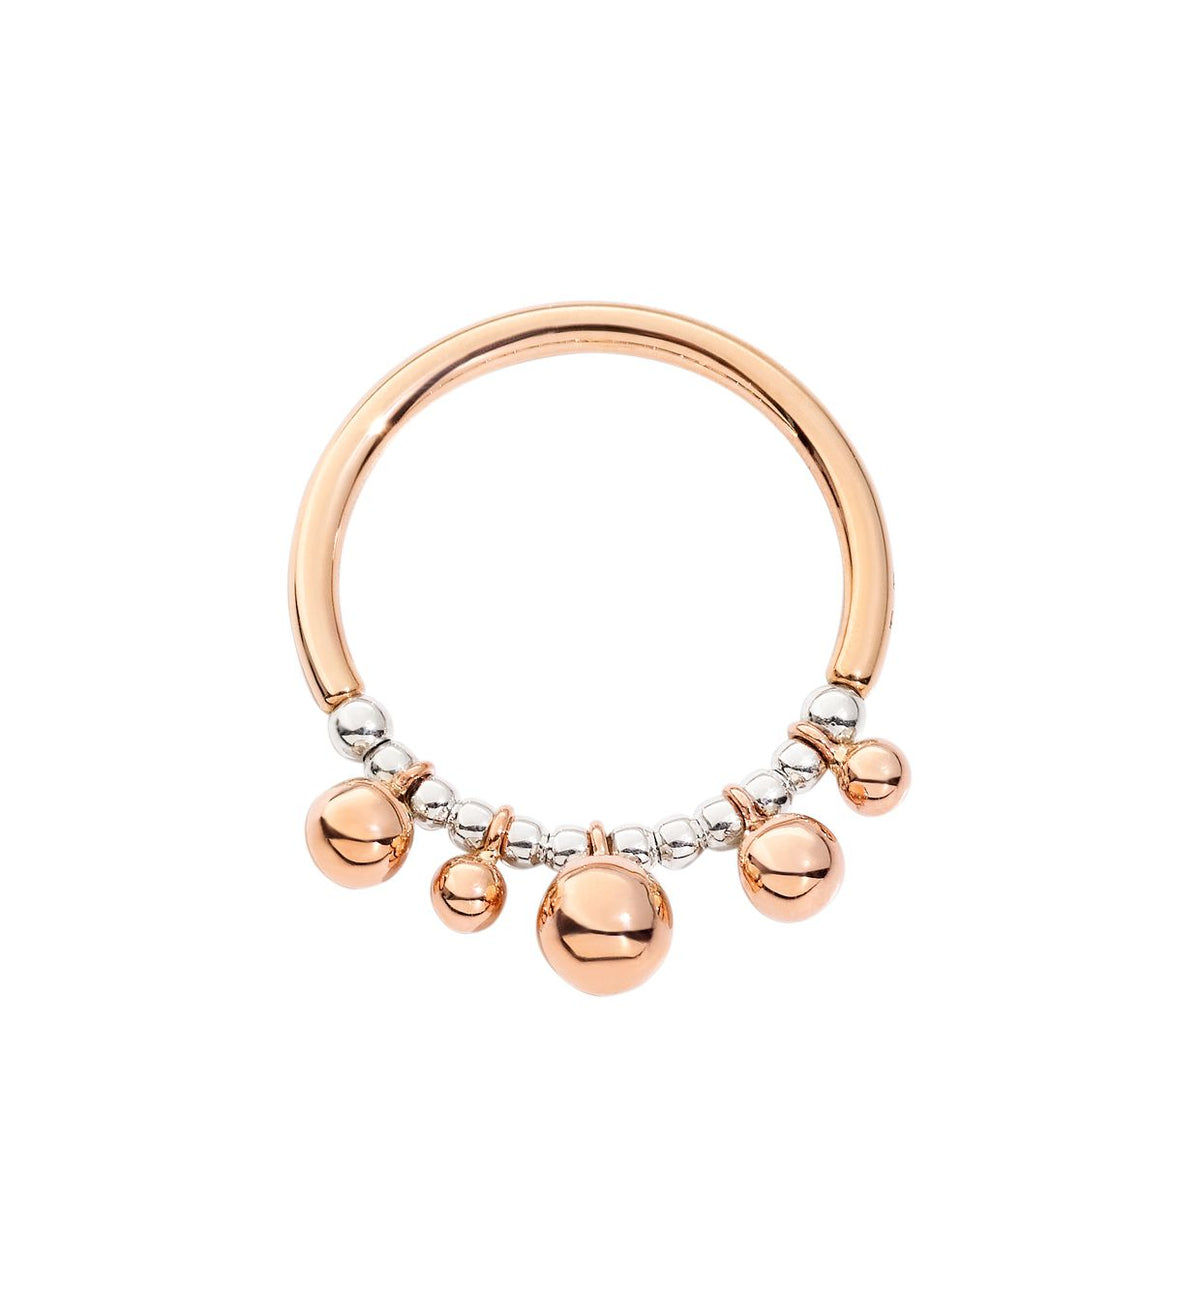 DoDo Bollicine Ring in Silver and 9k Rose Gold - Orsini Jewellers NZ